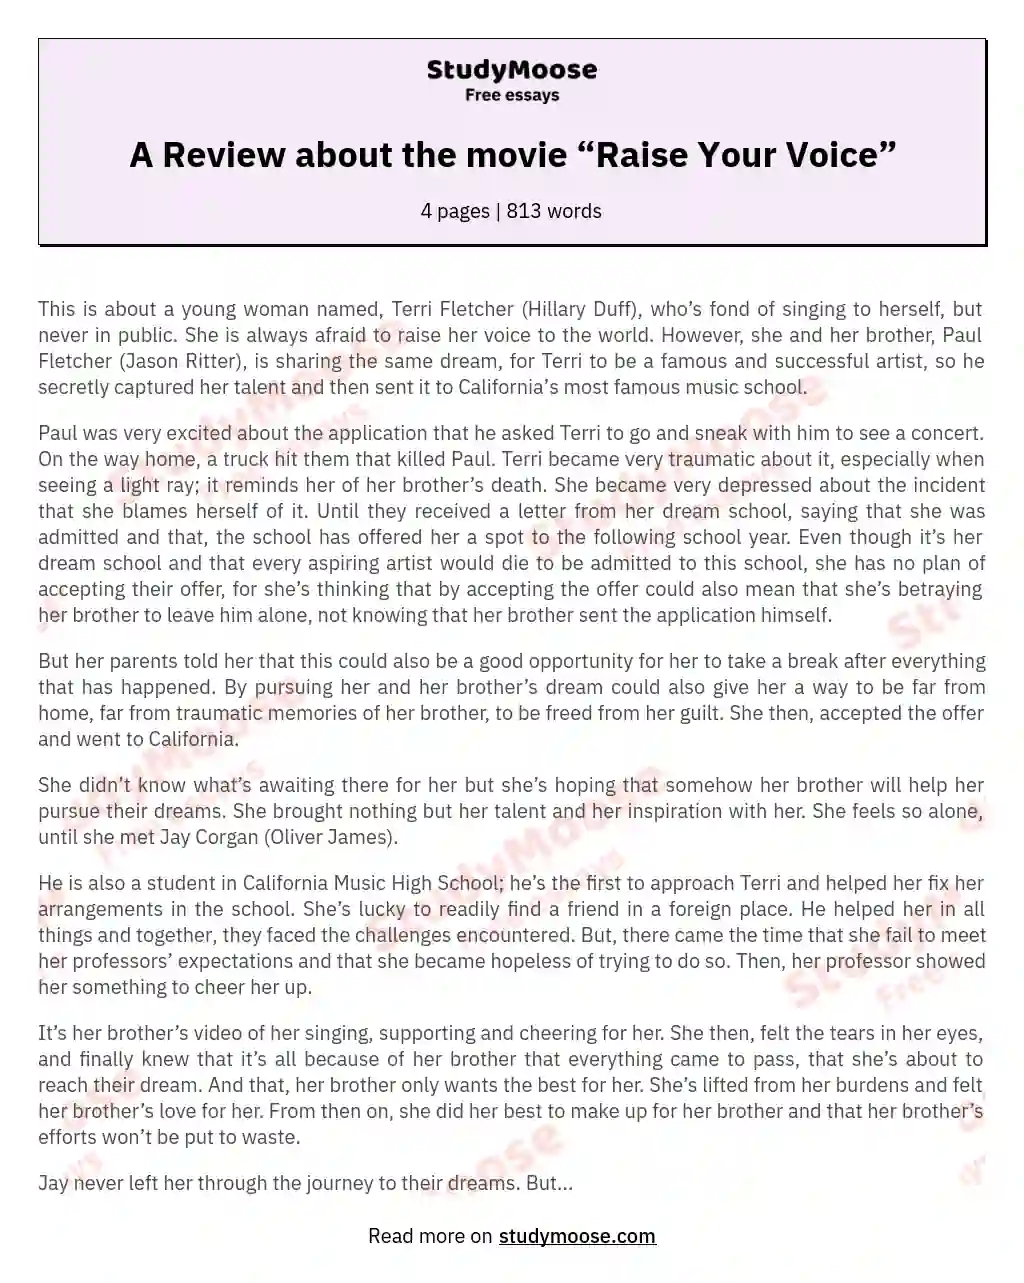 A Review about the movie “Raise Your Voice”